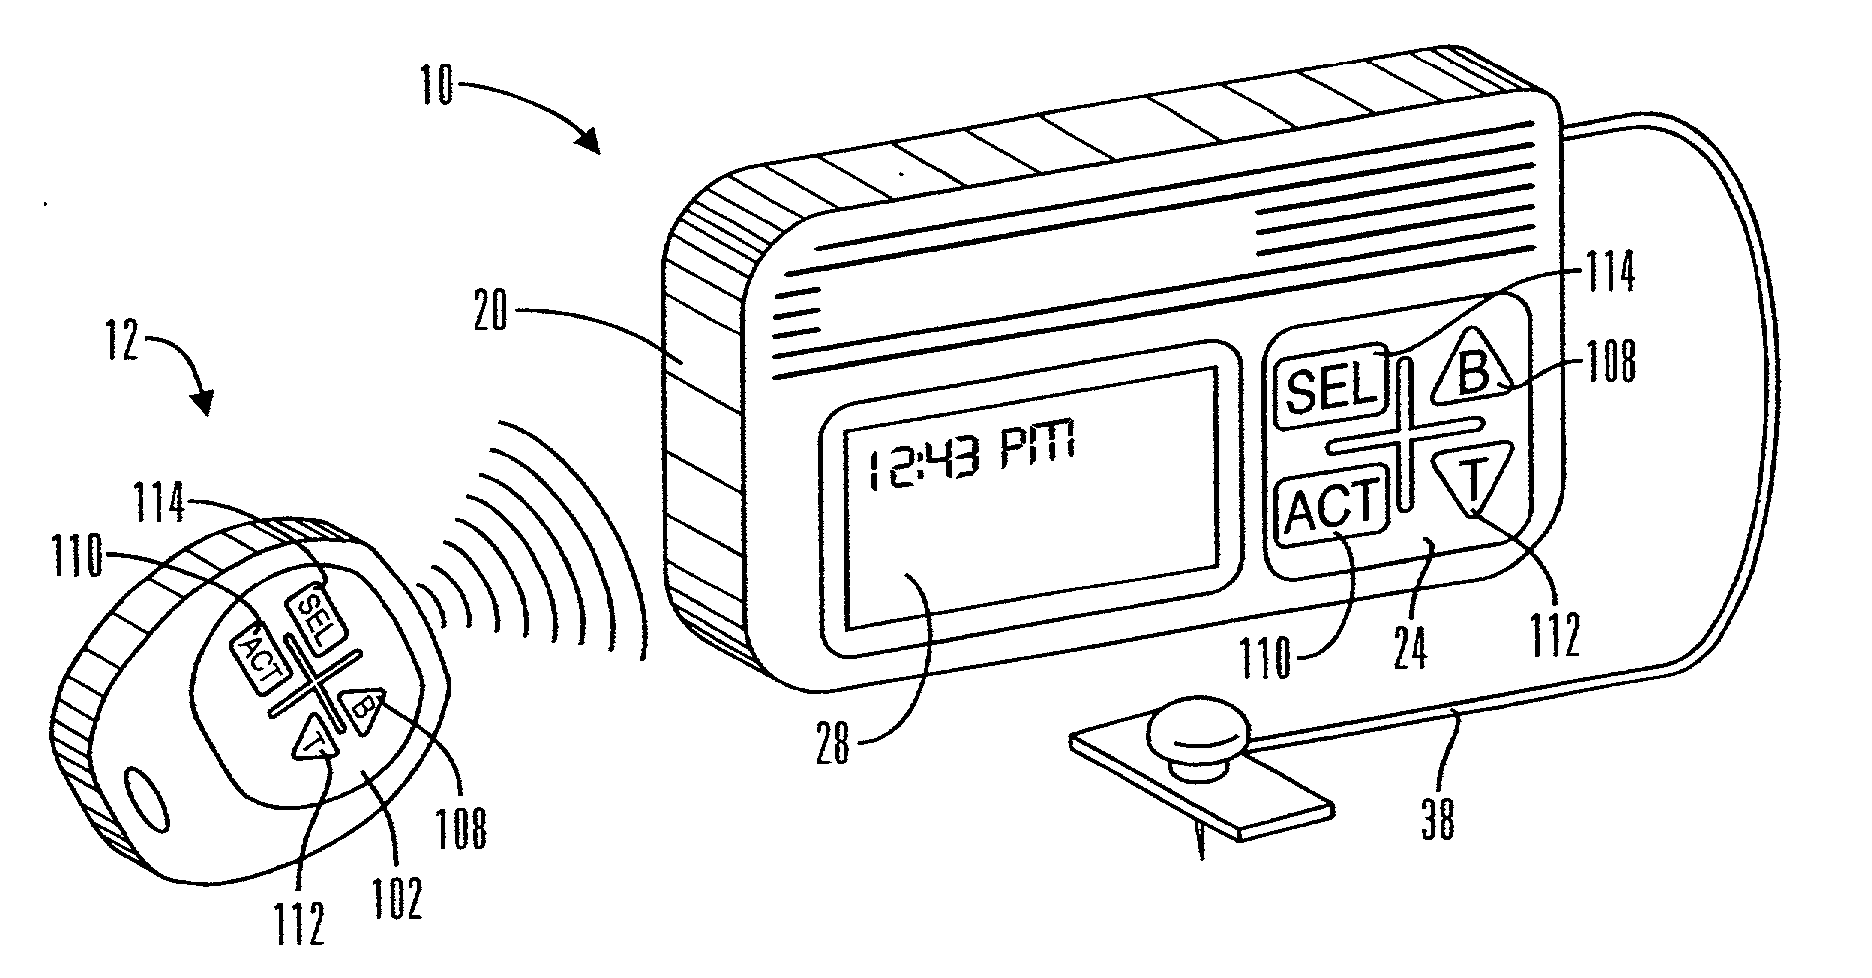 External infusion device with remote programming, bolus estimator and/or vibration alarm capabilities